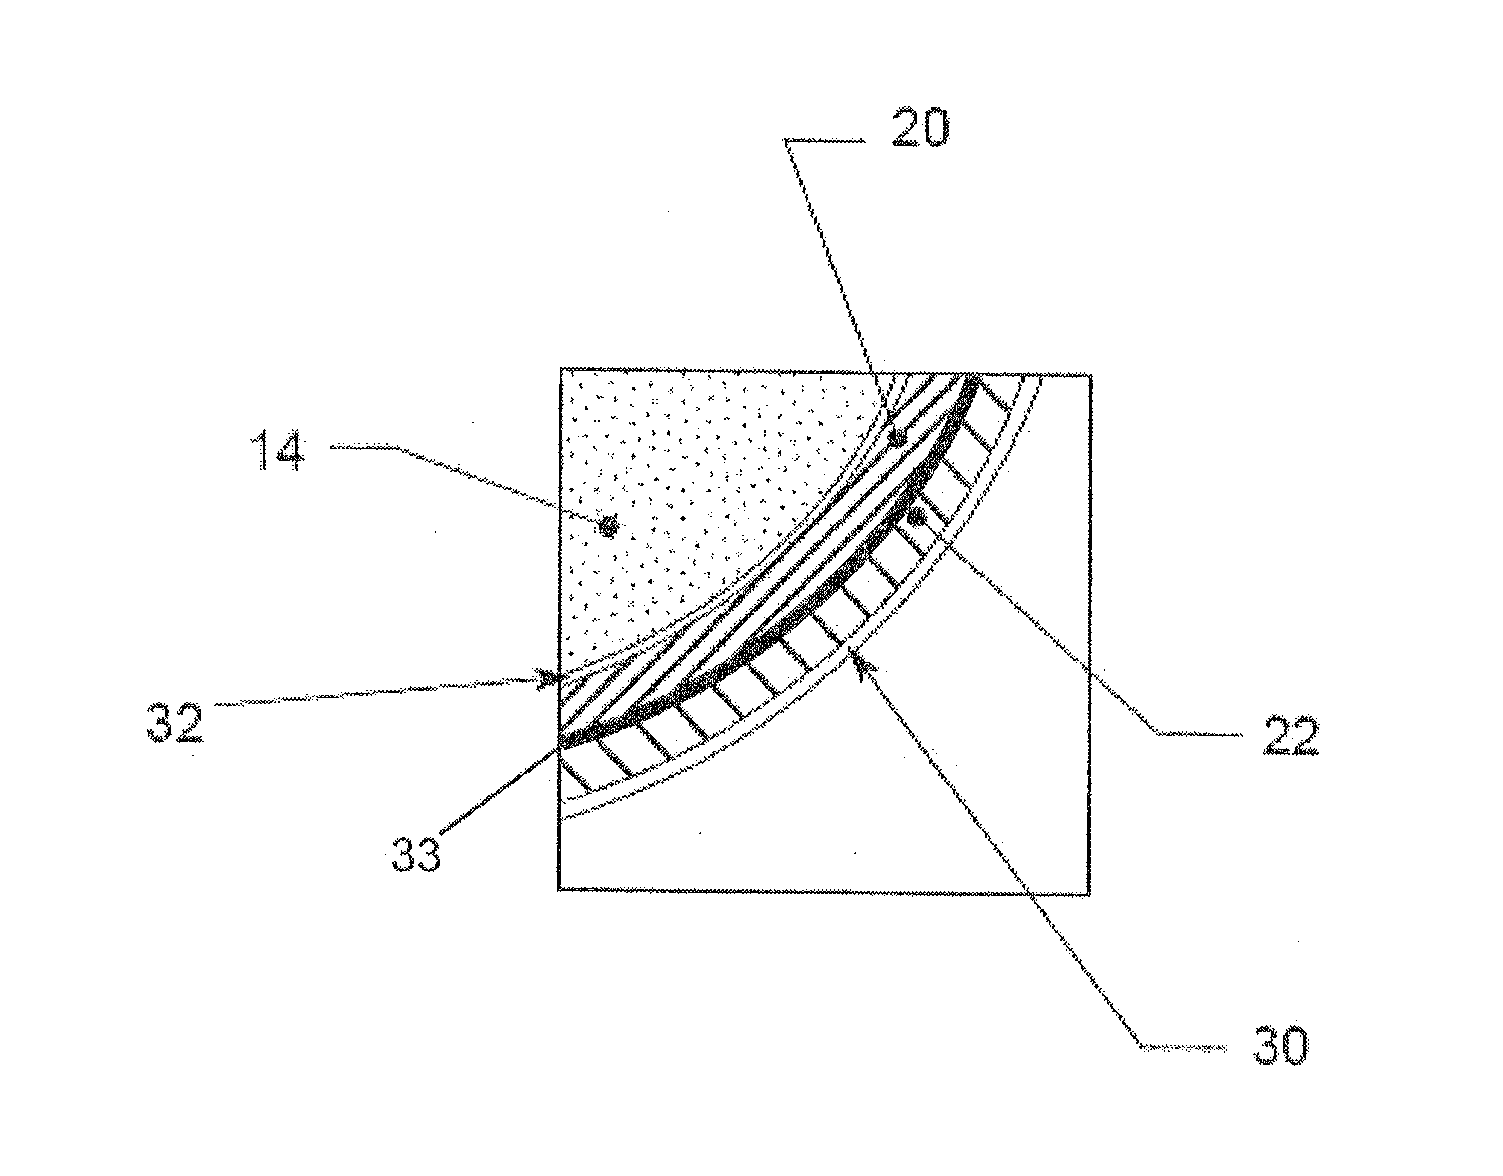 Silicon carbide multilayered cladding and nuclear reactor fuel element for use in water-cooled nuclear power reactors